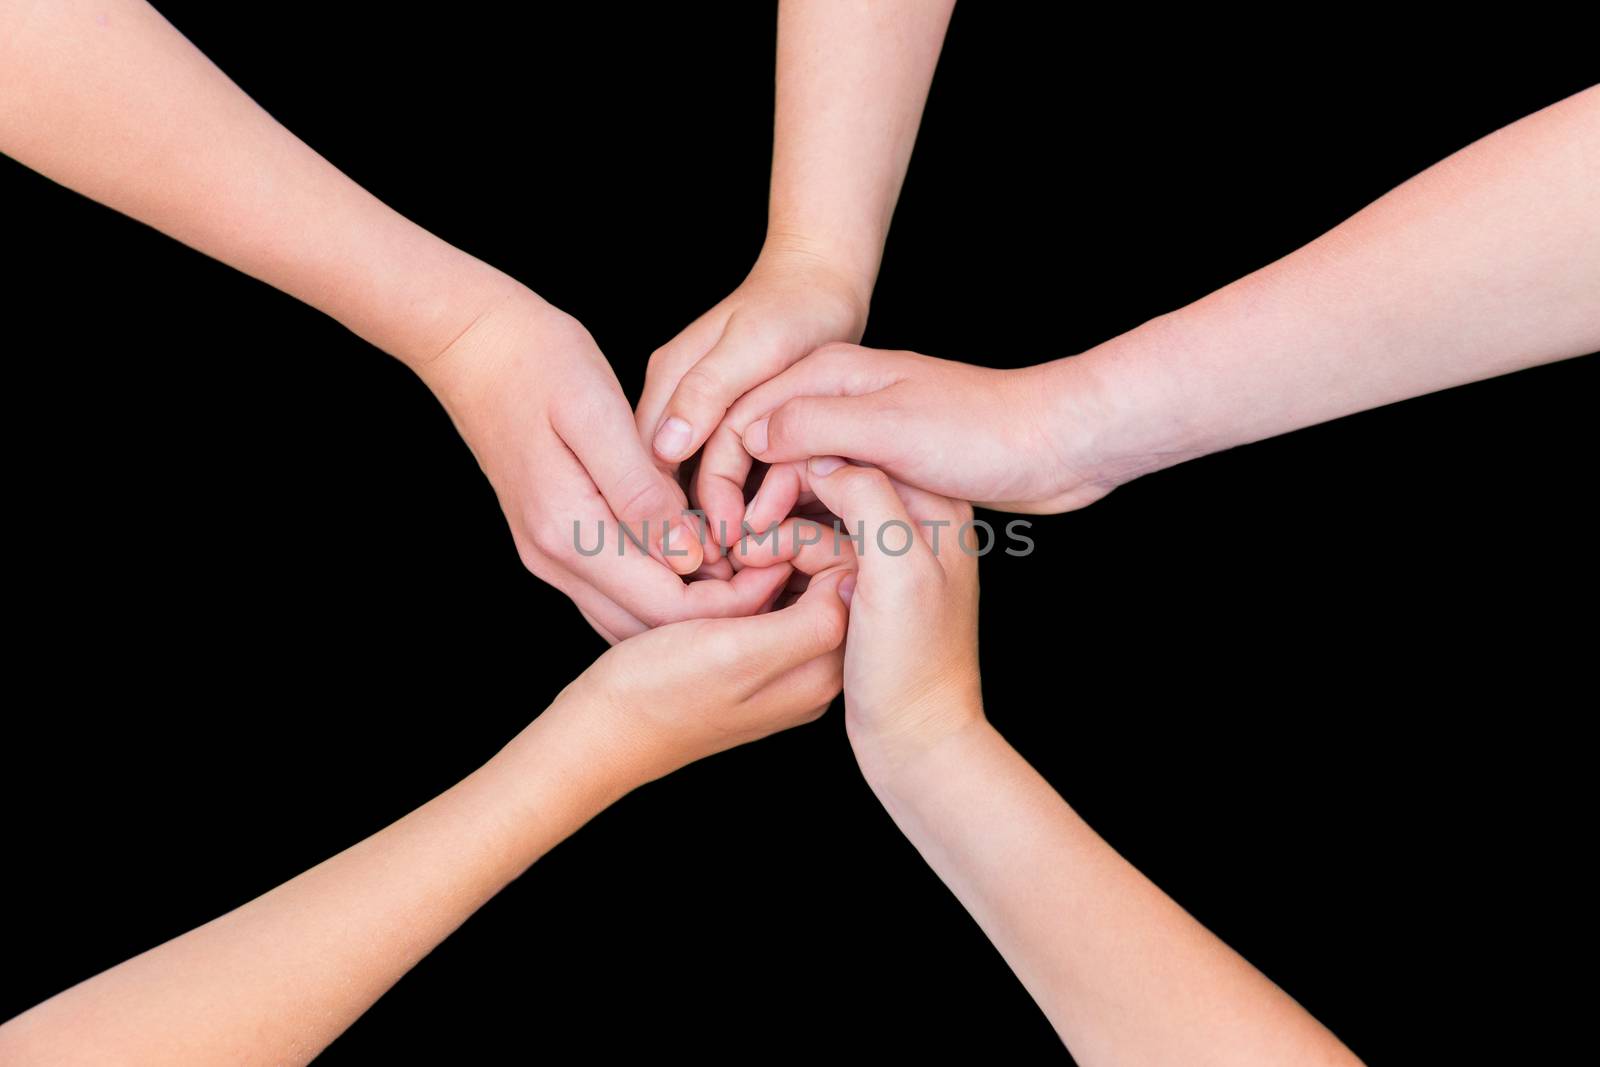 Five teenage arms with hands entangled isolated on black backgro by BenSchonewille